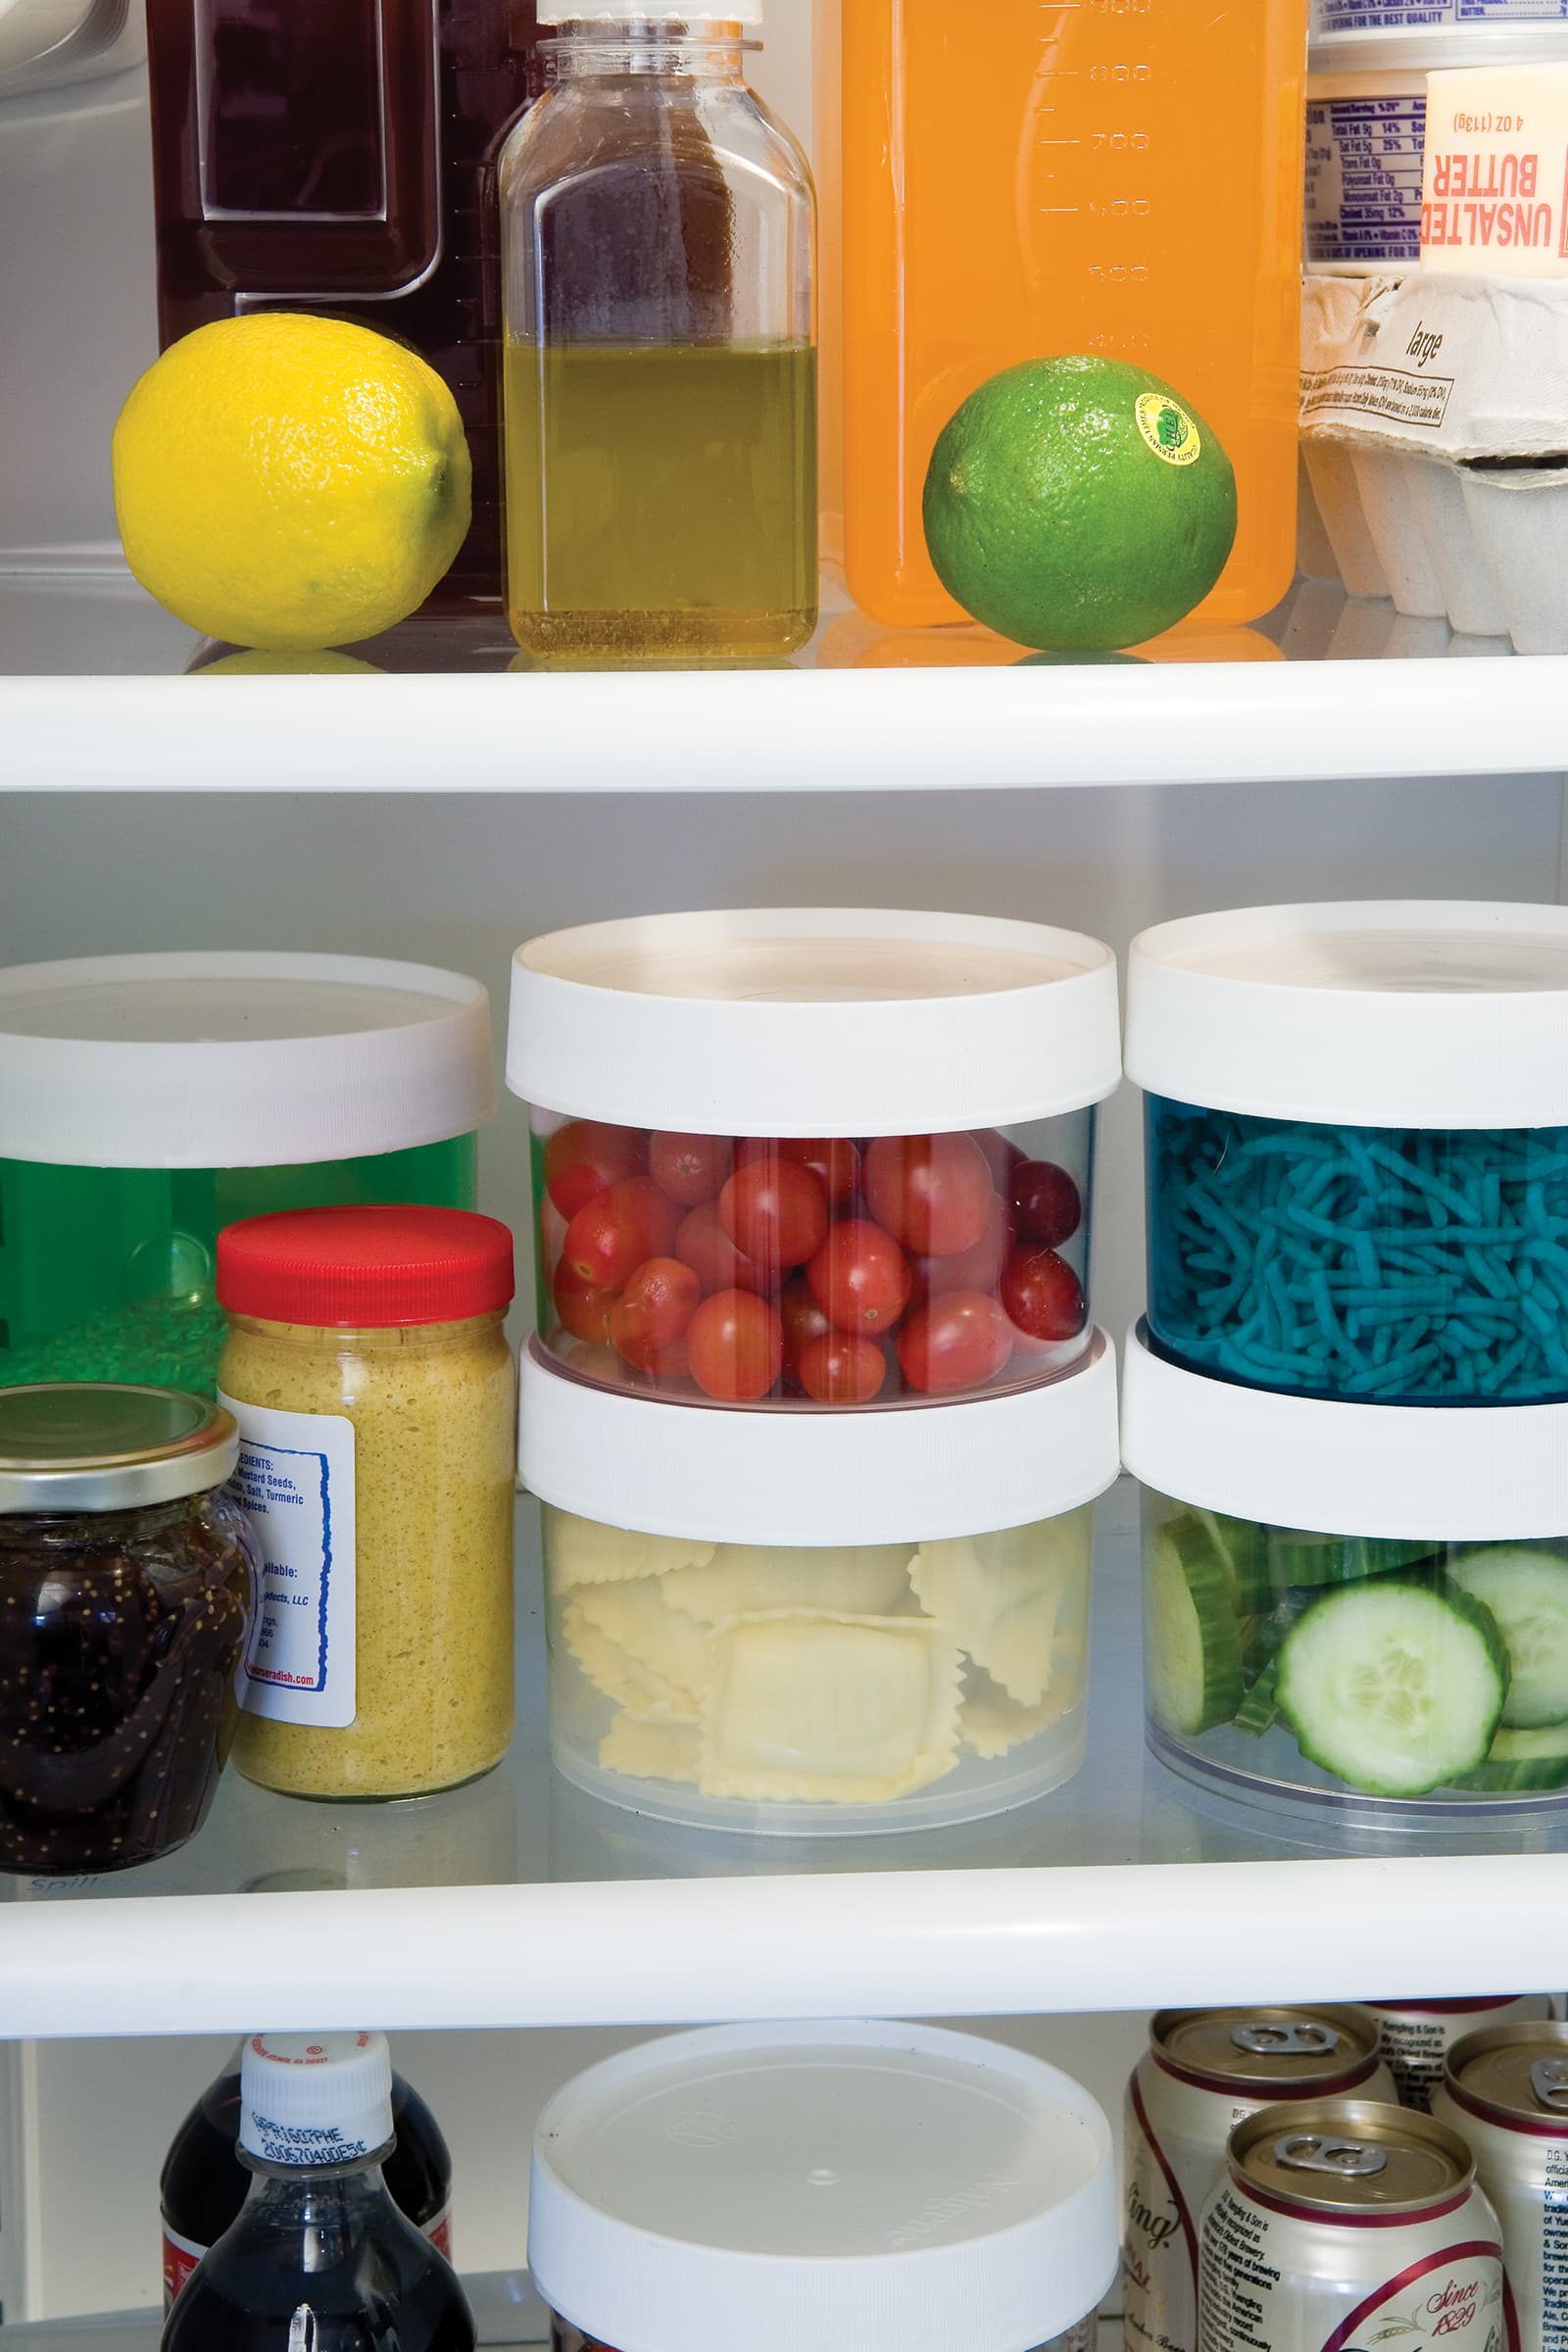 The 14 Best Food Storage Containers of 2022